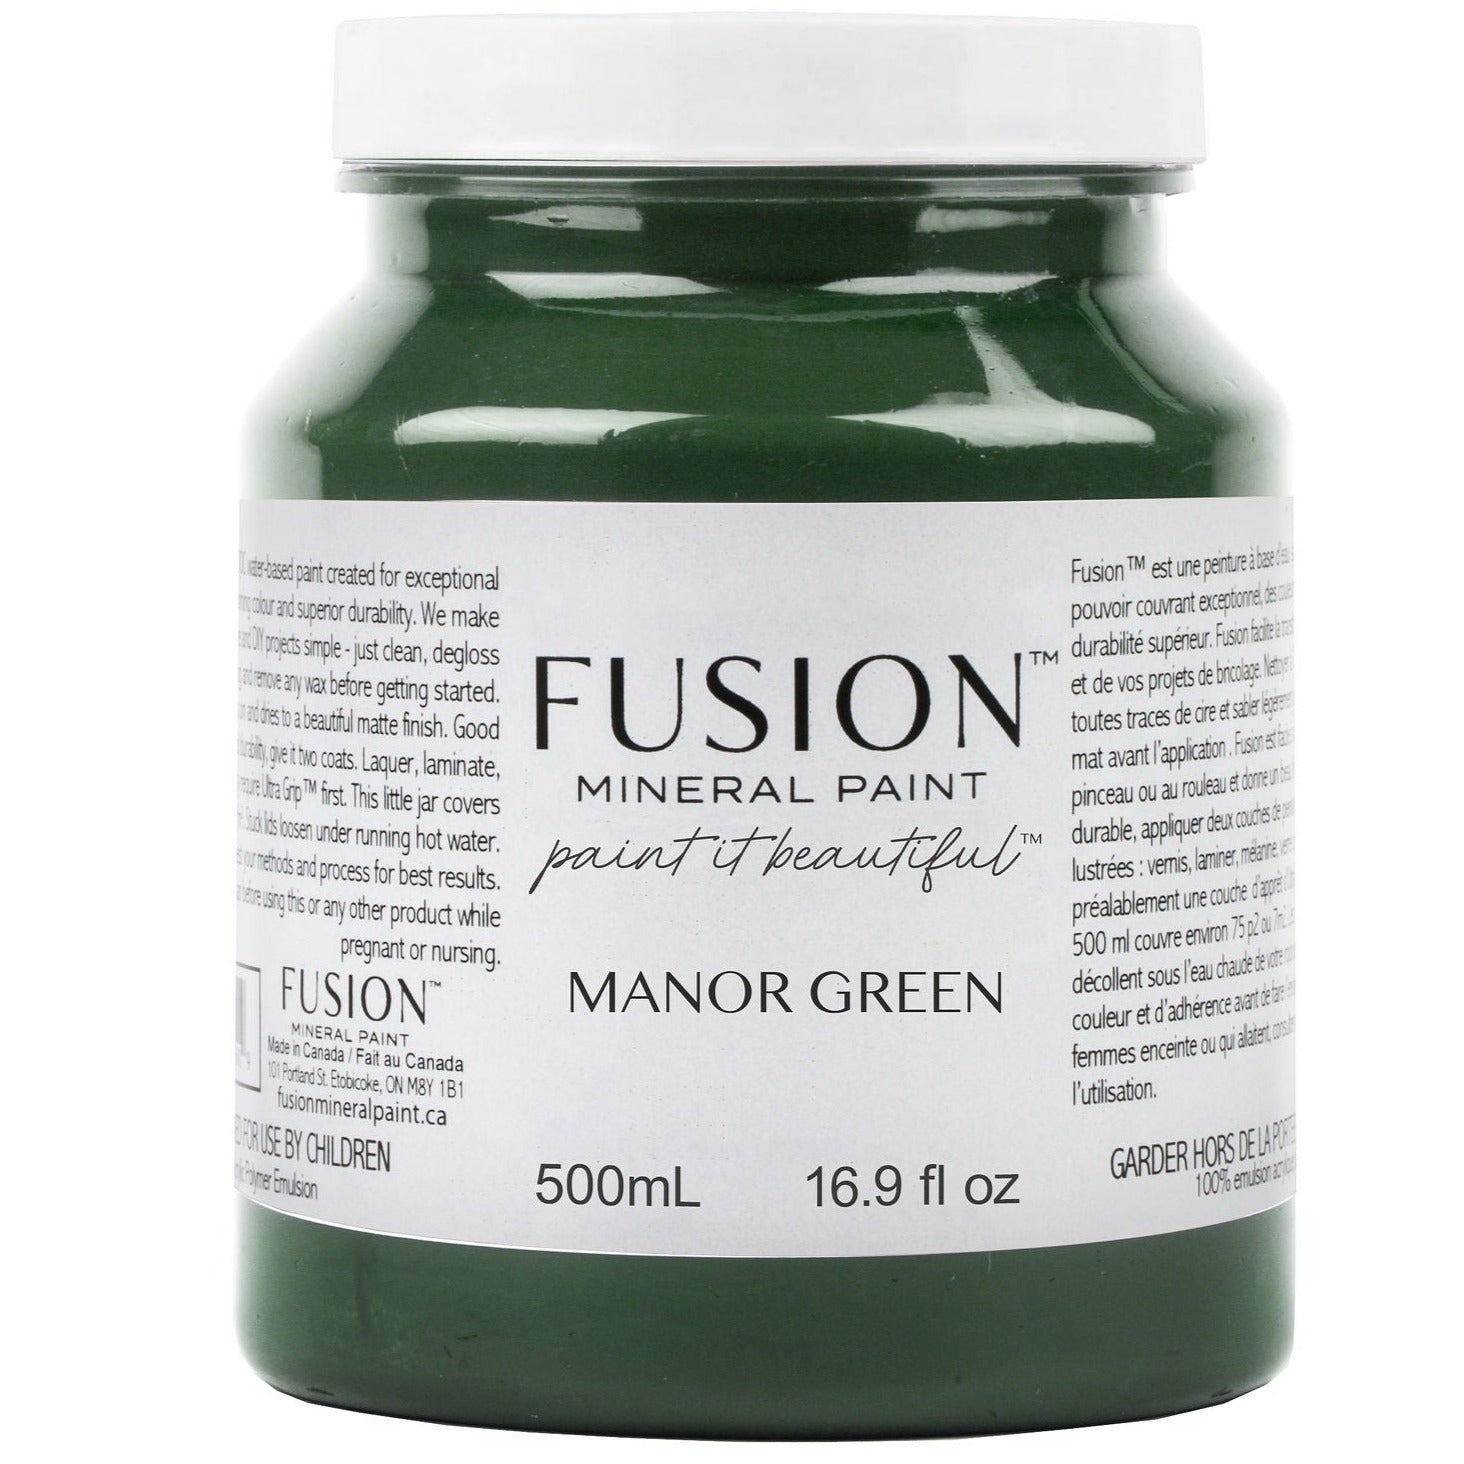 Manor Green Fusion Mineral Paint @ The Painted Heirloom